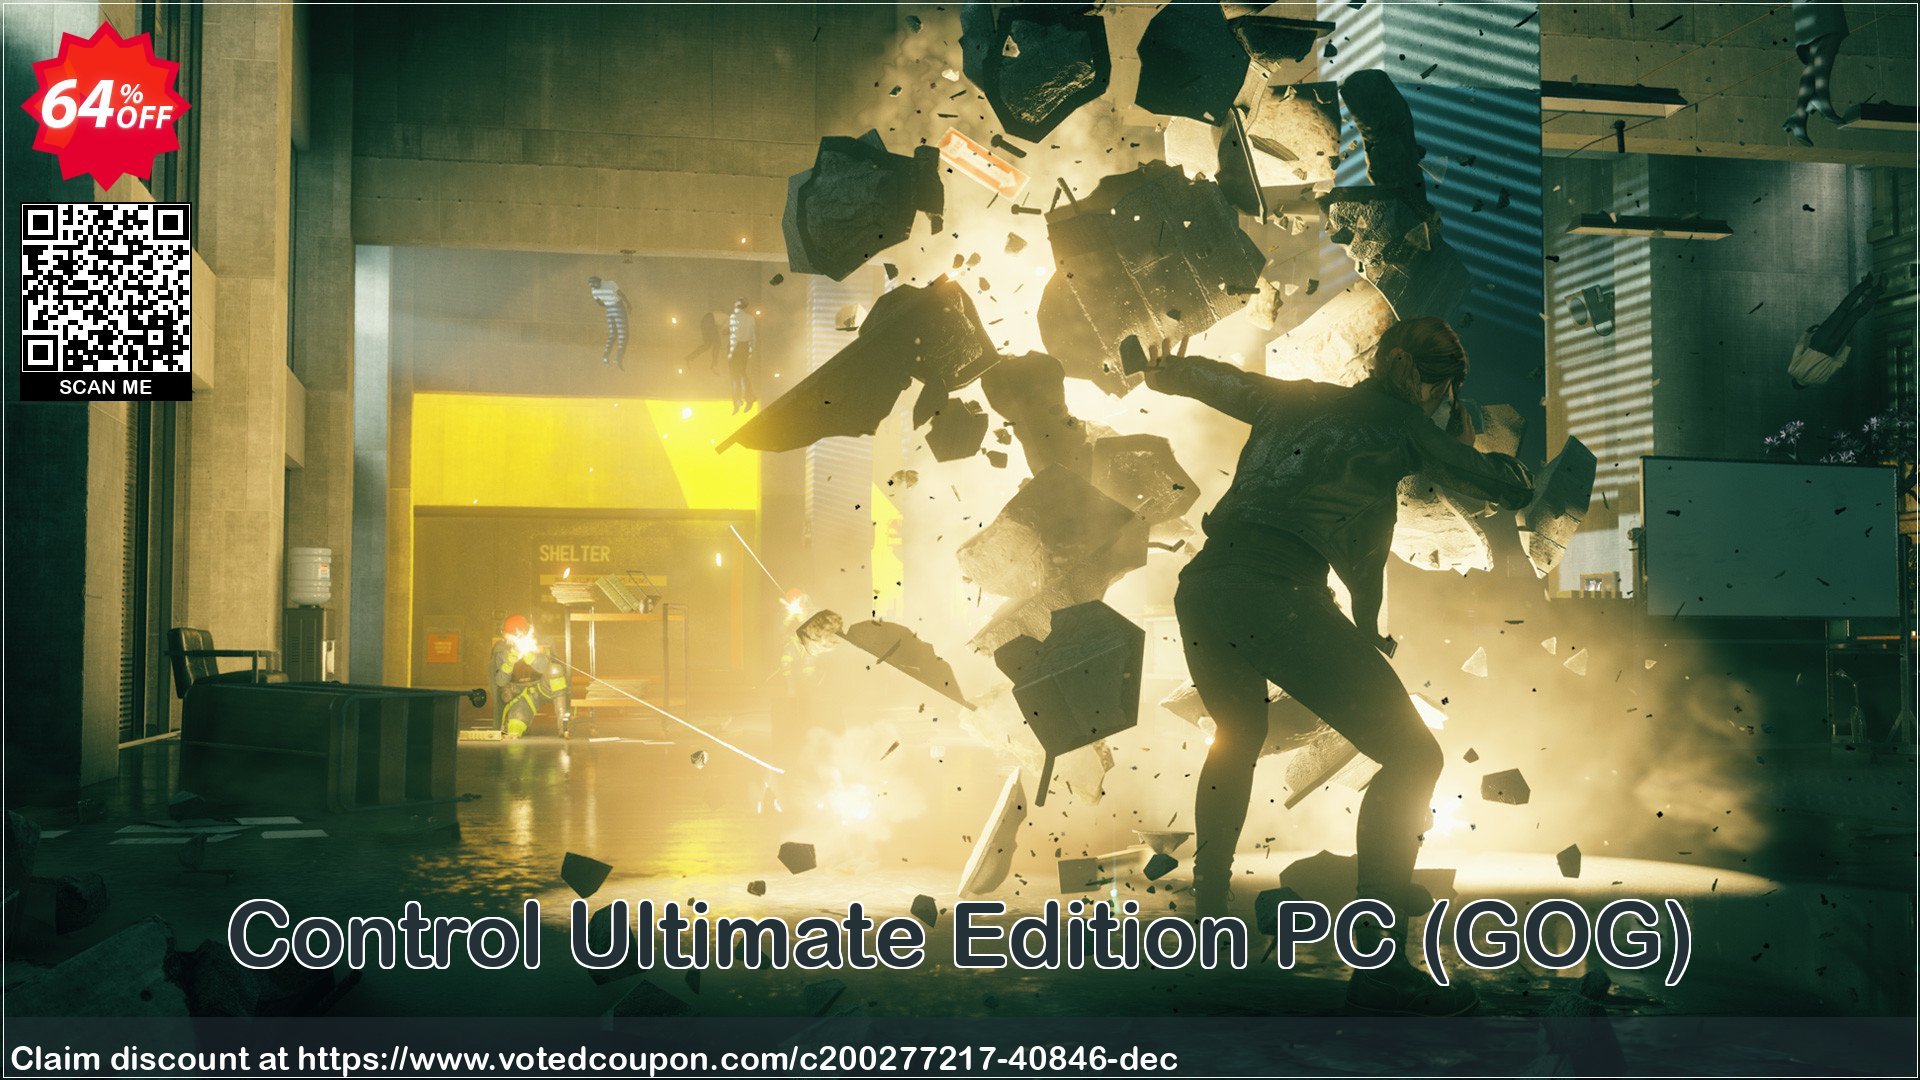 Control Ultimate Edition PC, GOG  Coupon Code May 2024, 64% OFF - VotedCoupon